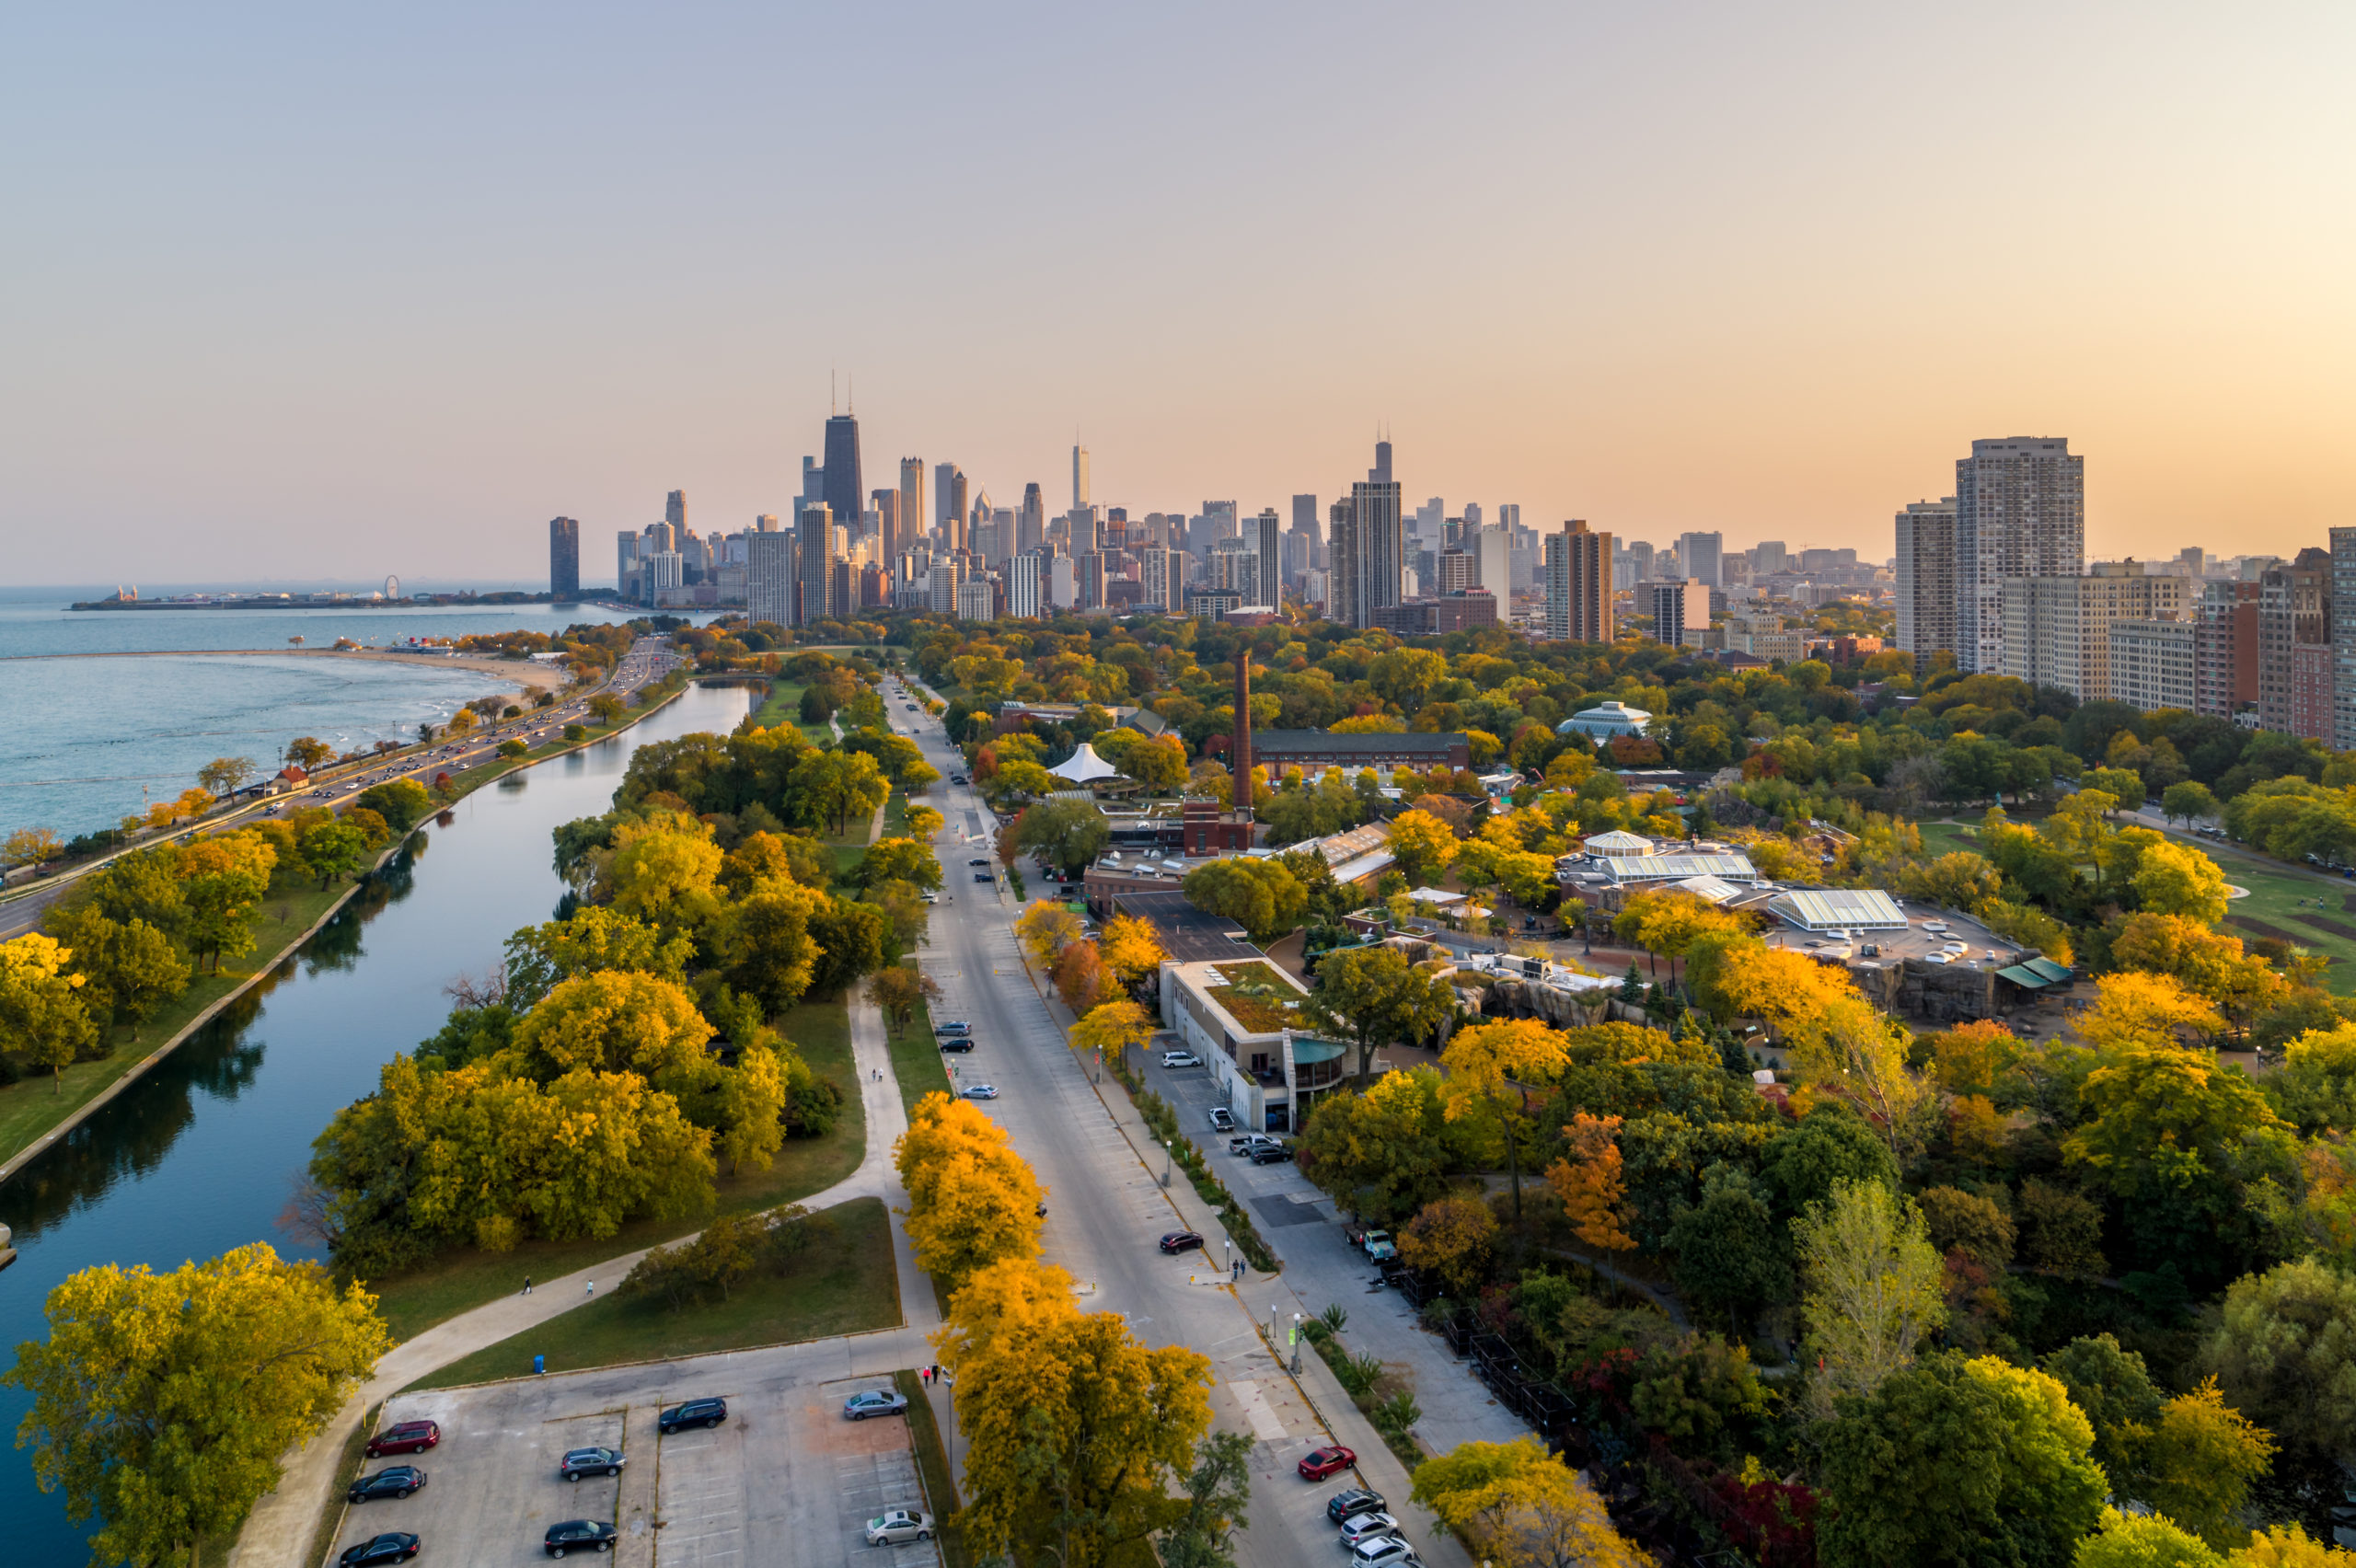 An aerial view of Lincoln Park in Chicago shows bodies of water to the left and groups of beatiful green and yellow trees separated by buildings and strips of pavement, which leads to the Chicago skyline in the background.